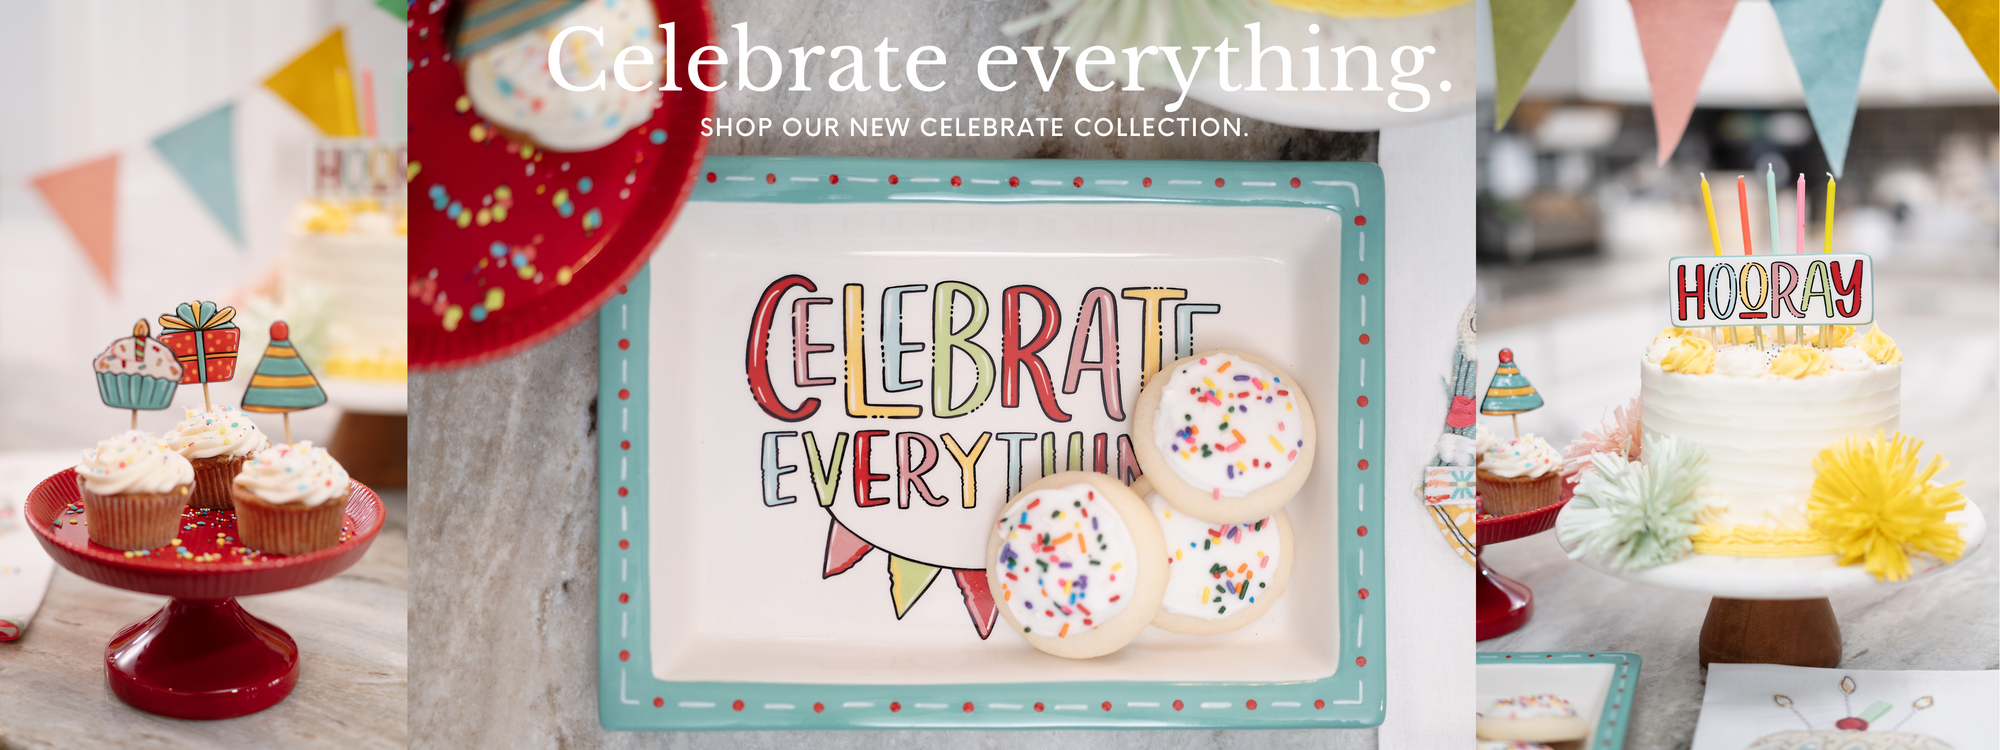 Celebrate Everything. Shop our new celebrate collection